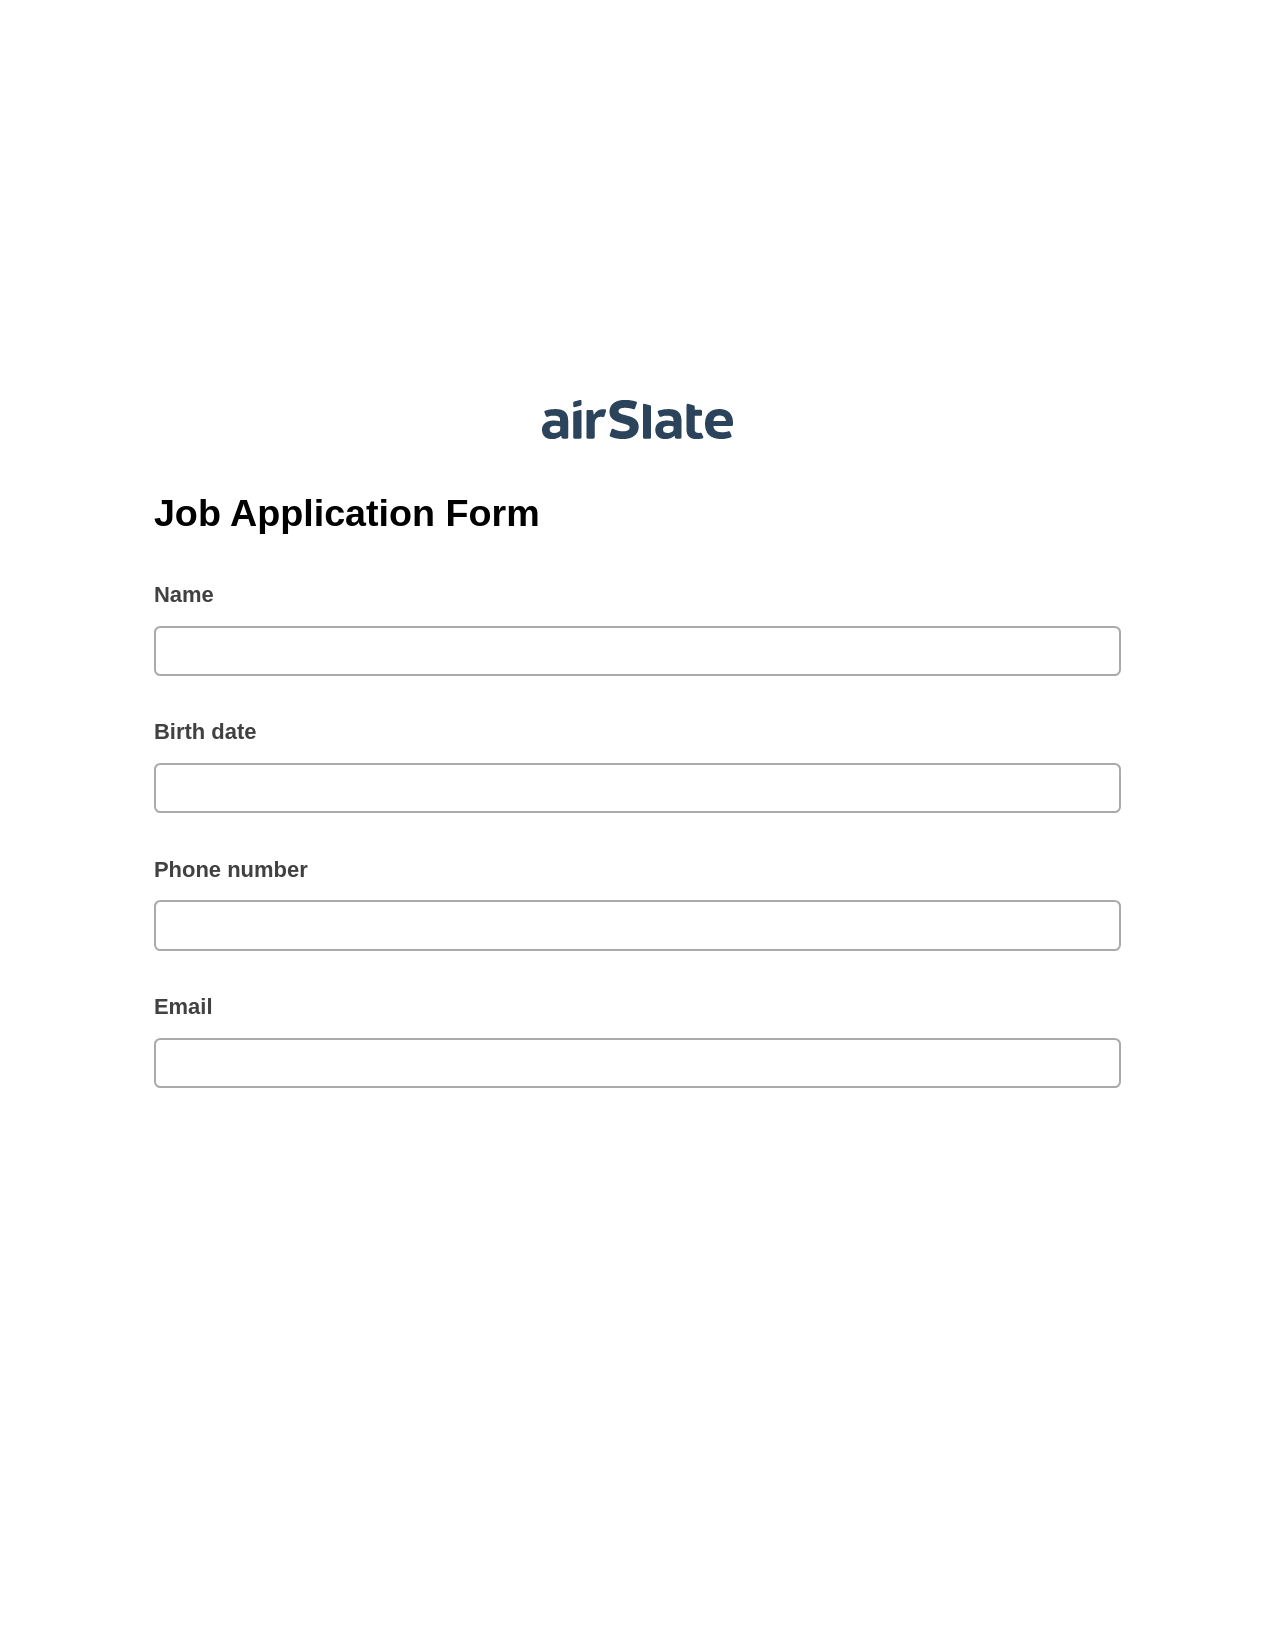 Multirole Job Application Form Pre-fill from CSV File Dropdown Options Bot, Remove Tags From Slate Bot, Export to Formstack Documents Bot